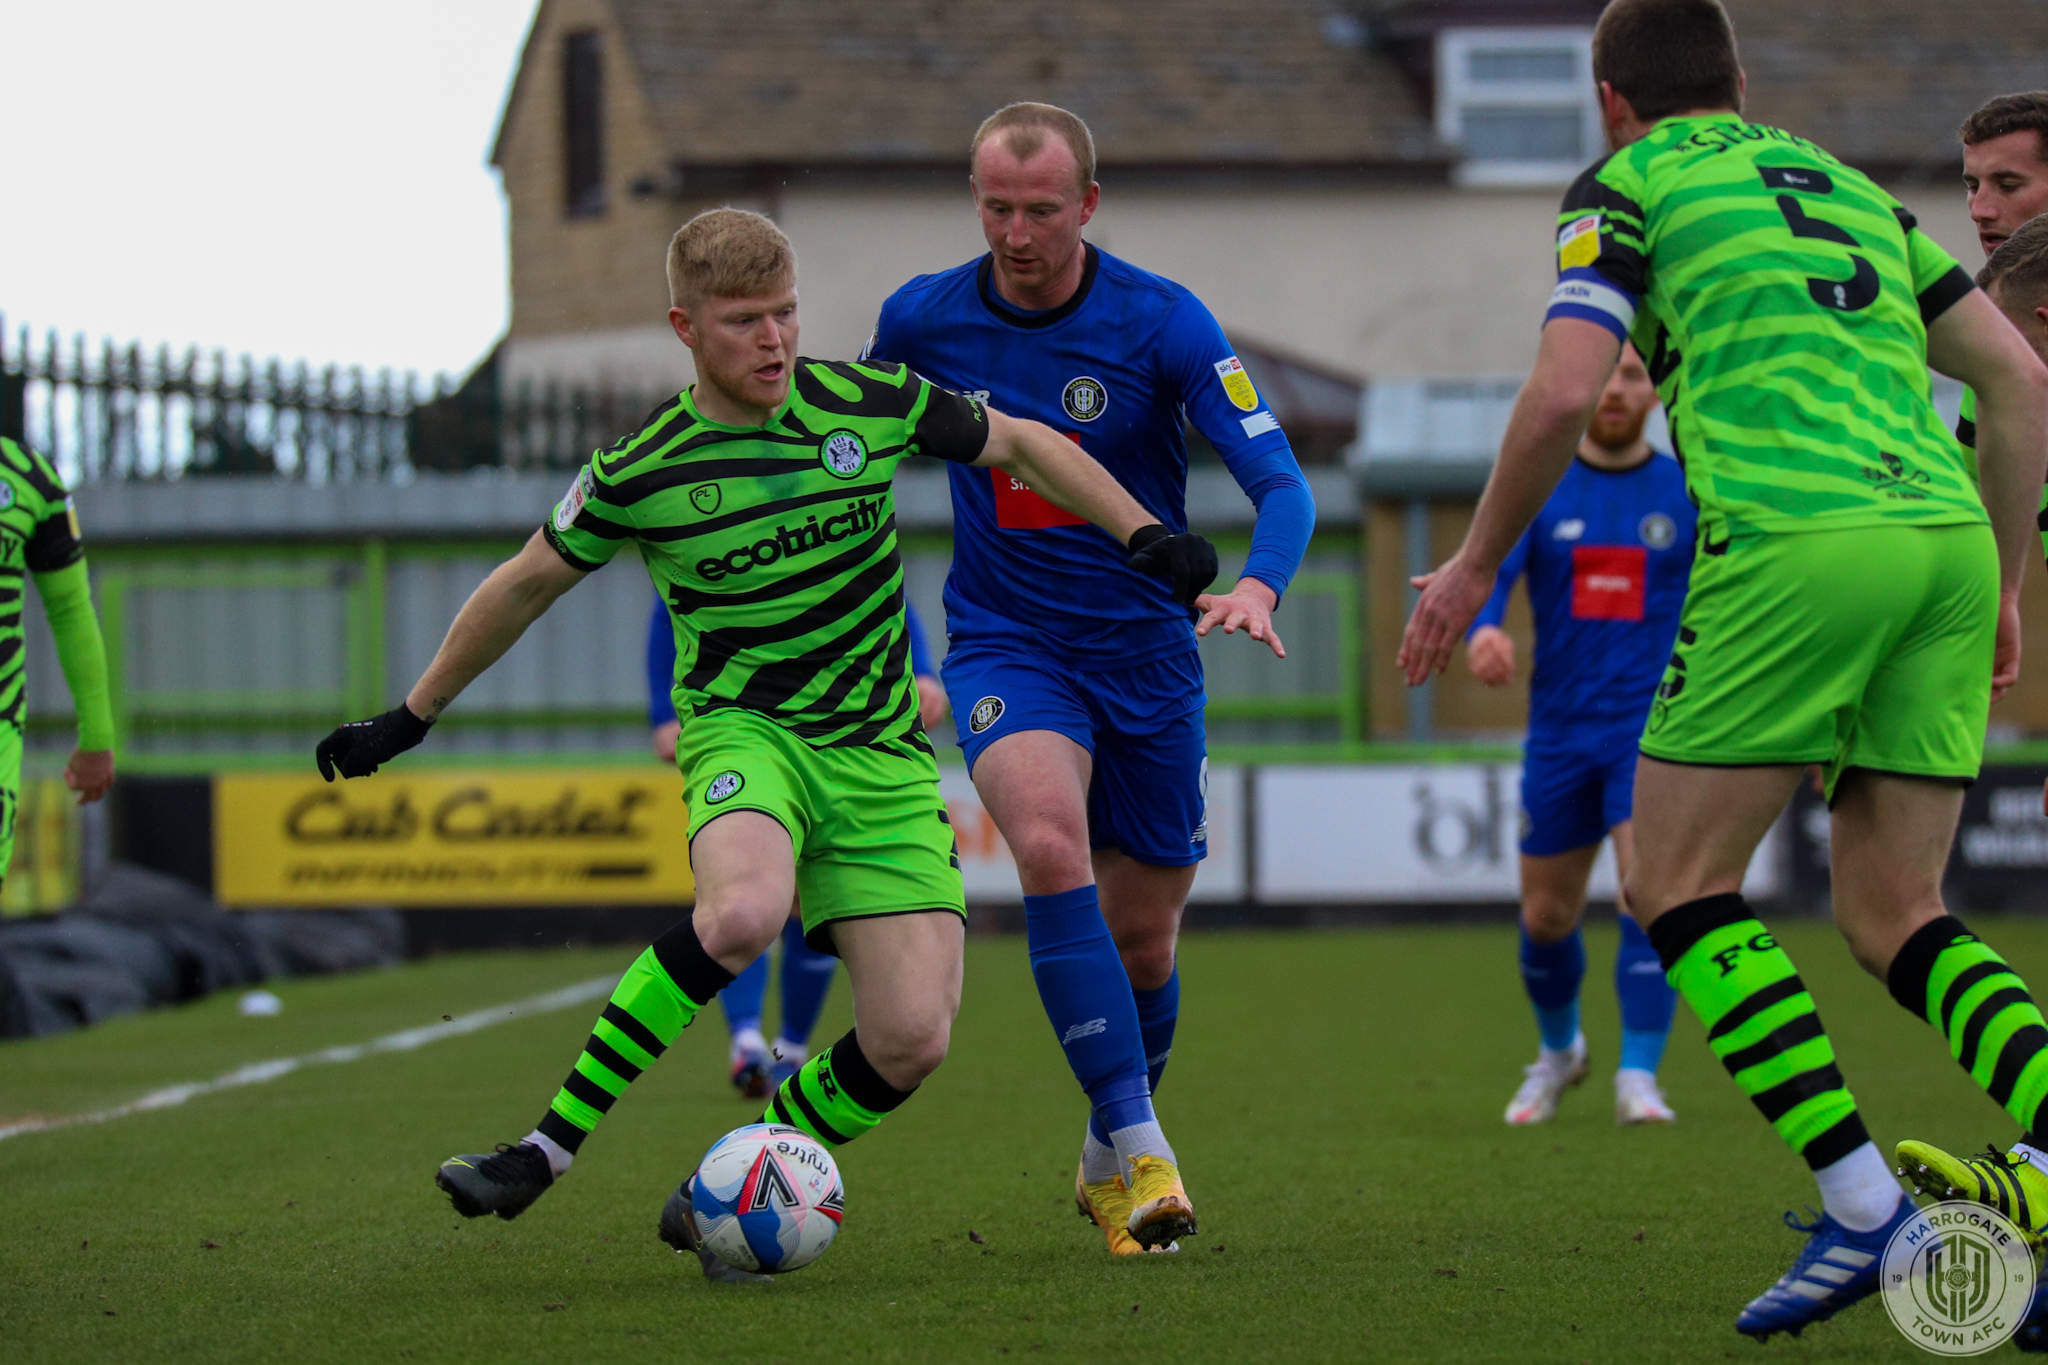 Forest Green  Rovers 2 - 1 Harrogate Town